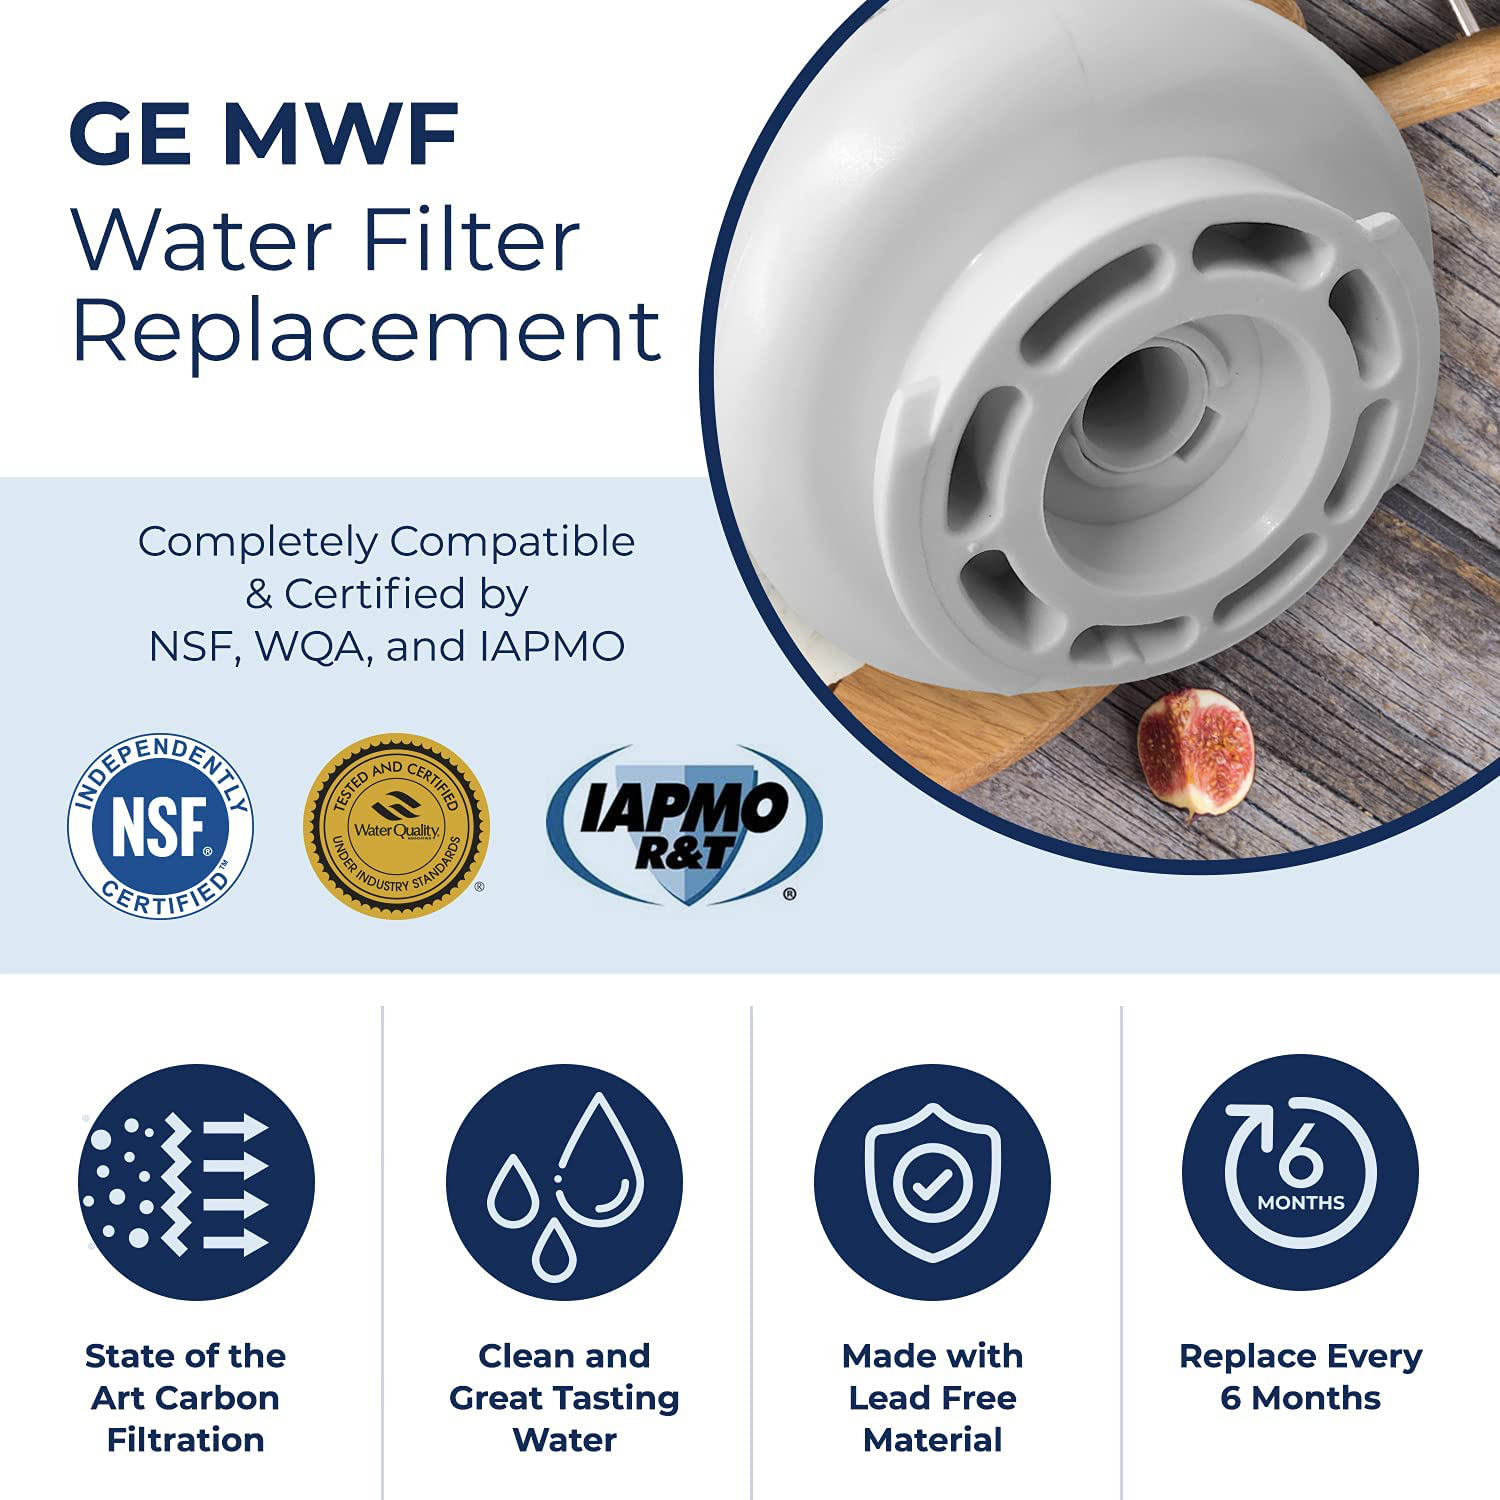 Pureline MWF Water Filter Replacement. Compatible with GE MWF And MWFP, MWFA, MWFAP, MWFINT, GWF, GWFA, HWF, HWFA, HDX FMG-1, Smartwater, WFC1201, GSE25GSHECSS, 197D6321P006 (3 Pack)